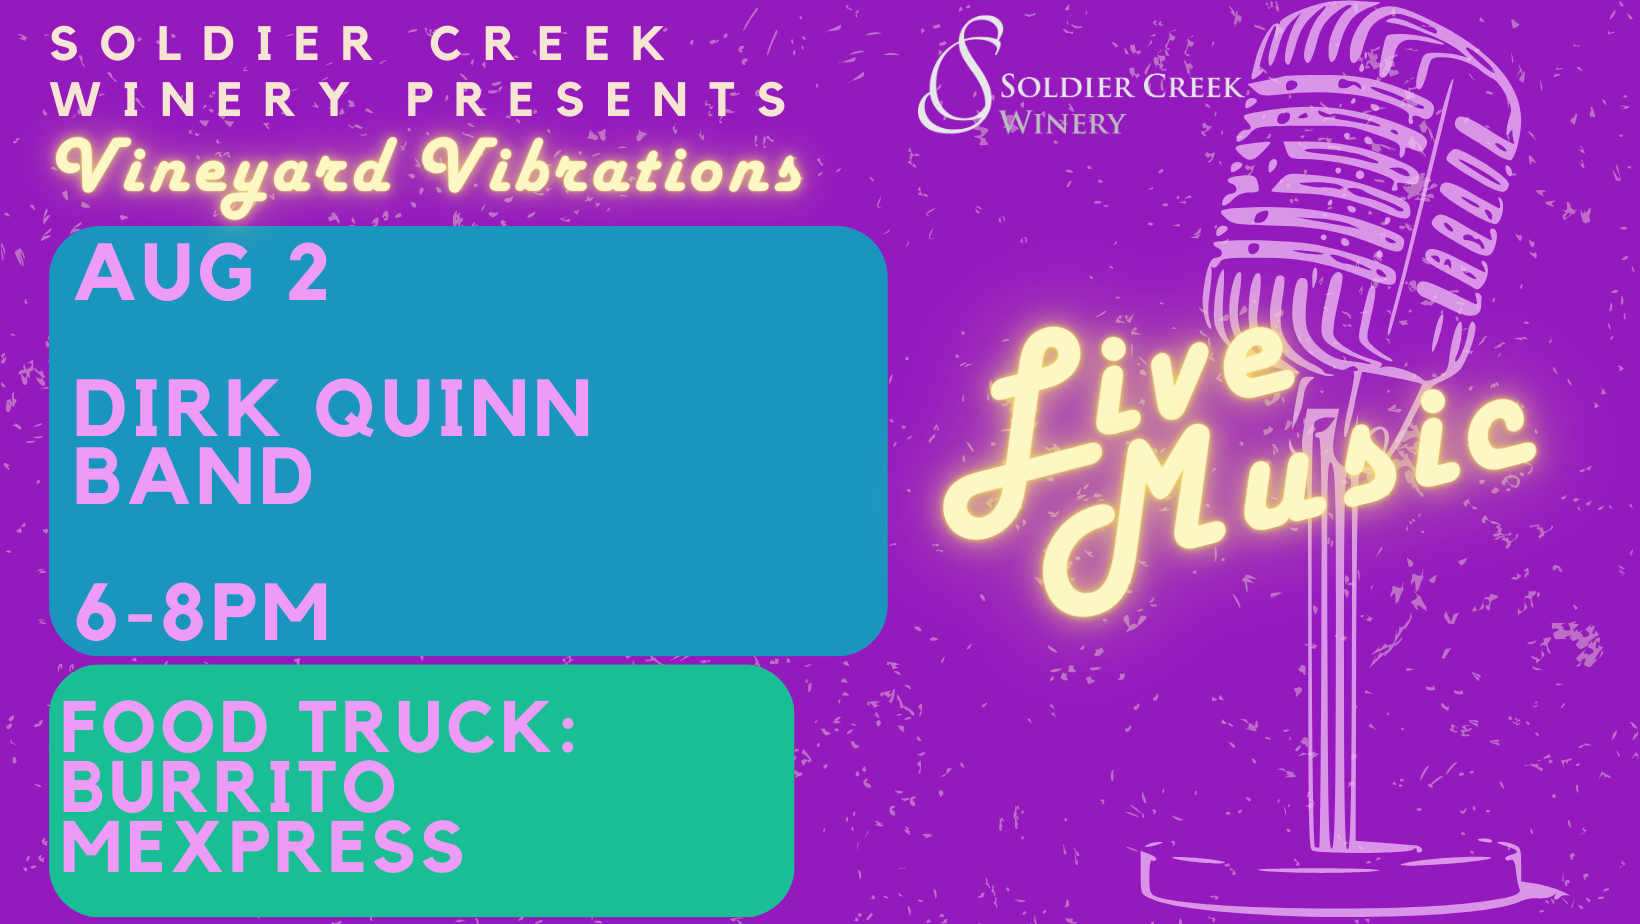 graphic depicting a microphone and neon word overlay stating "live music". words read "soldier creek winery presents vineyard vibrations, aug 2 dirk quinn band 6-8pm, food truck: burrito mexpress"